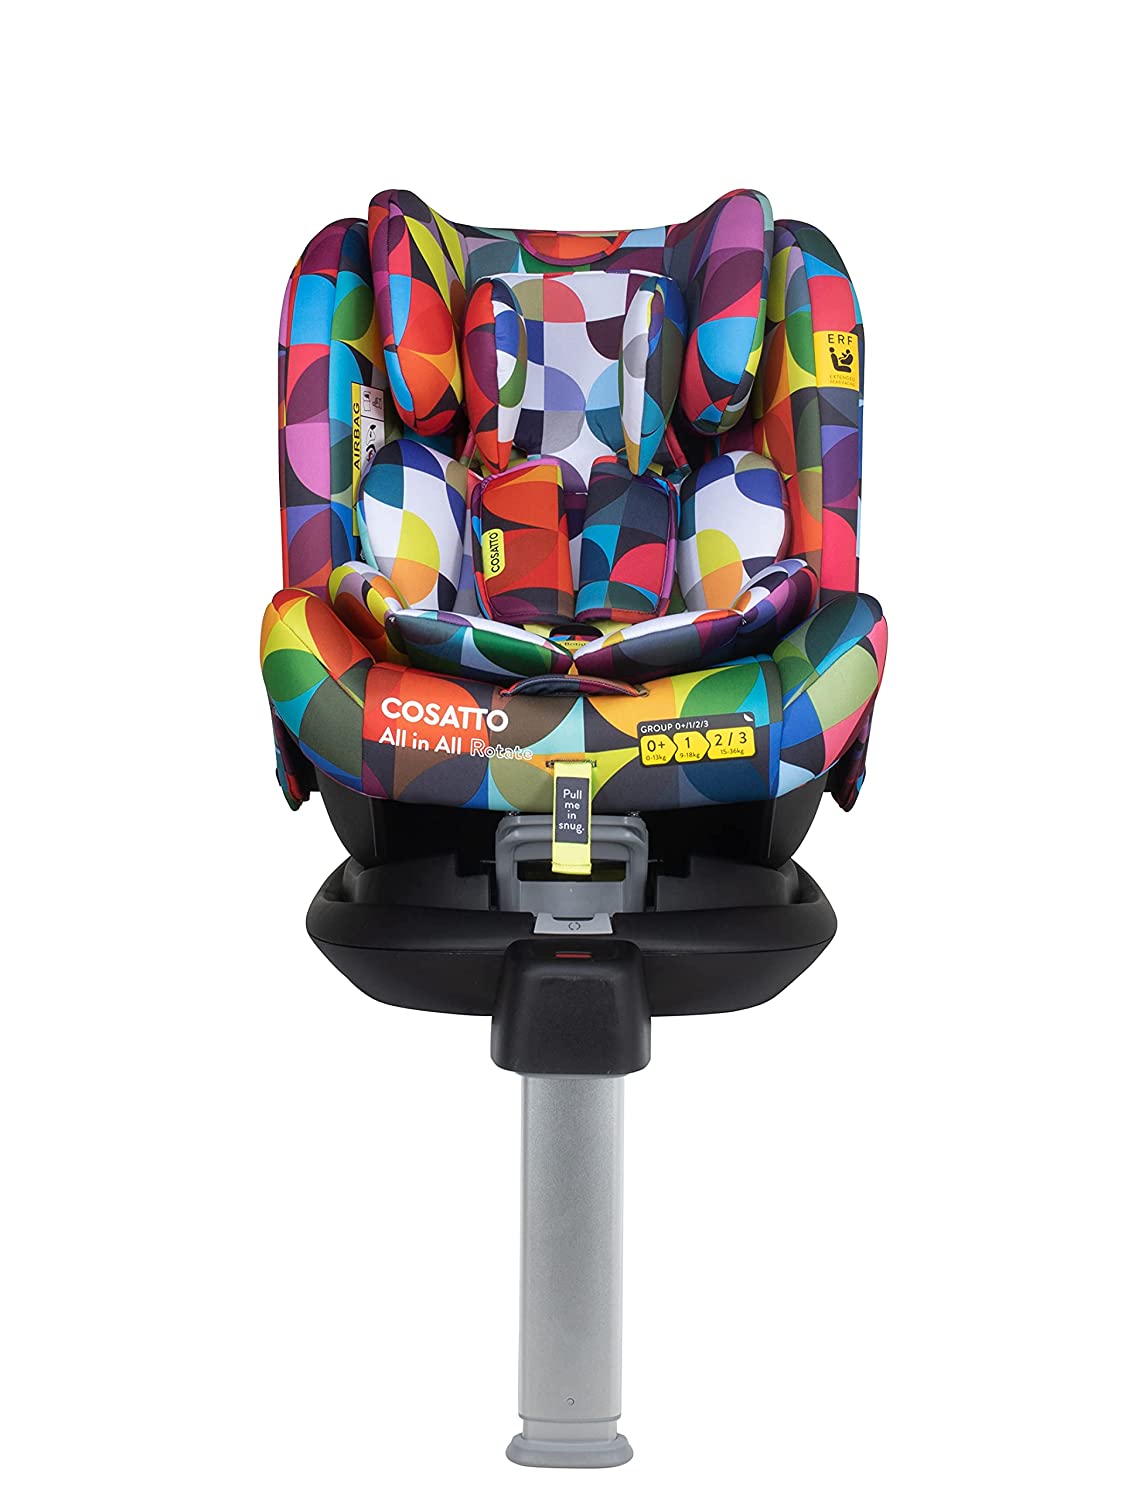 Cosatto All in All Rotate Car Seat for Babies to Children, Group 0+123, 0-36 kg, 0-12 Years, ISOFIX, ERF, Anti-Escape, Kaleidoscope